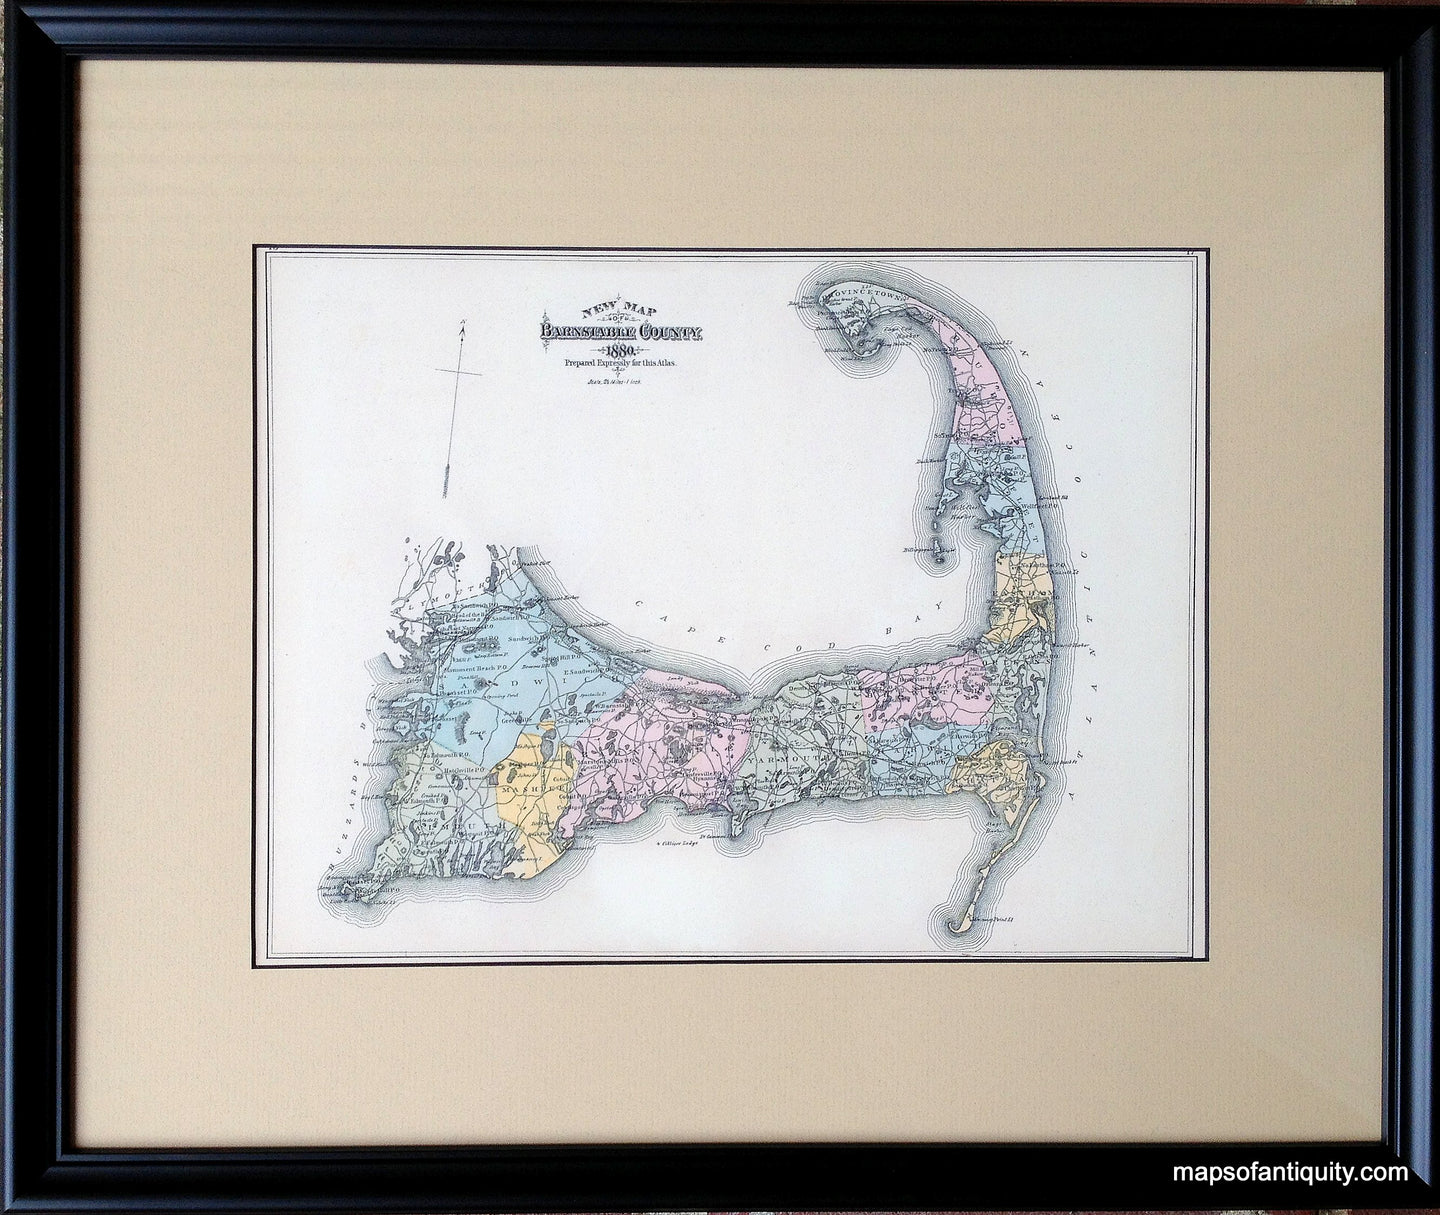 Framed-Reproduction-Barnstable-County-1880-smaller-size---Reproduction-Holiday-Gift-Reproductions-Reproduction-Walker-Maps-Of-Antiquity